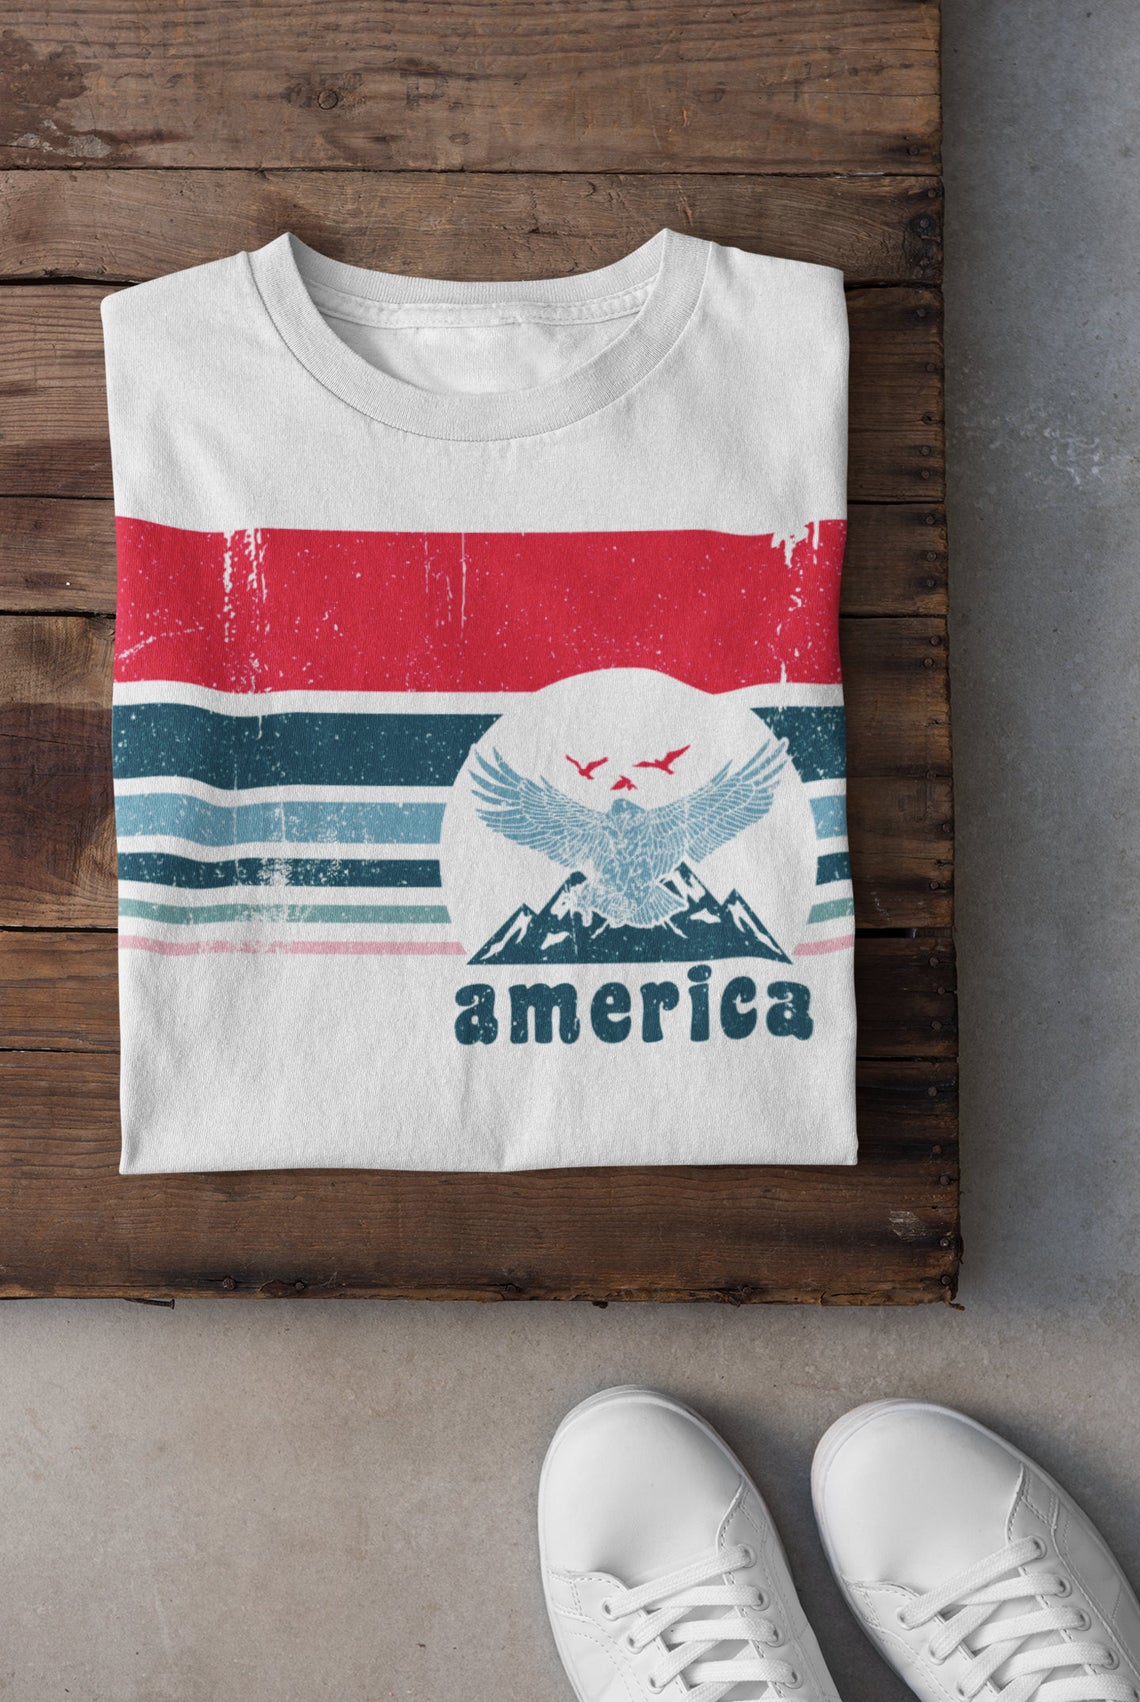 America 4th of July T-Shirt / Unisex Bella Canvas Tee Toddler- Adult Sizes / Softstyle USA T-Shirt/ Memorial Day Shirt